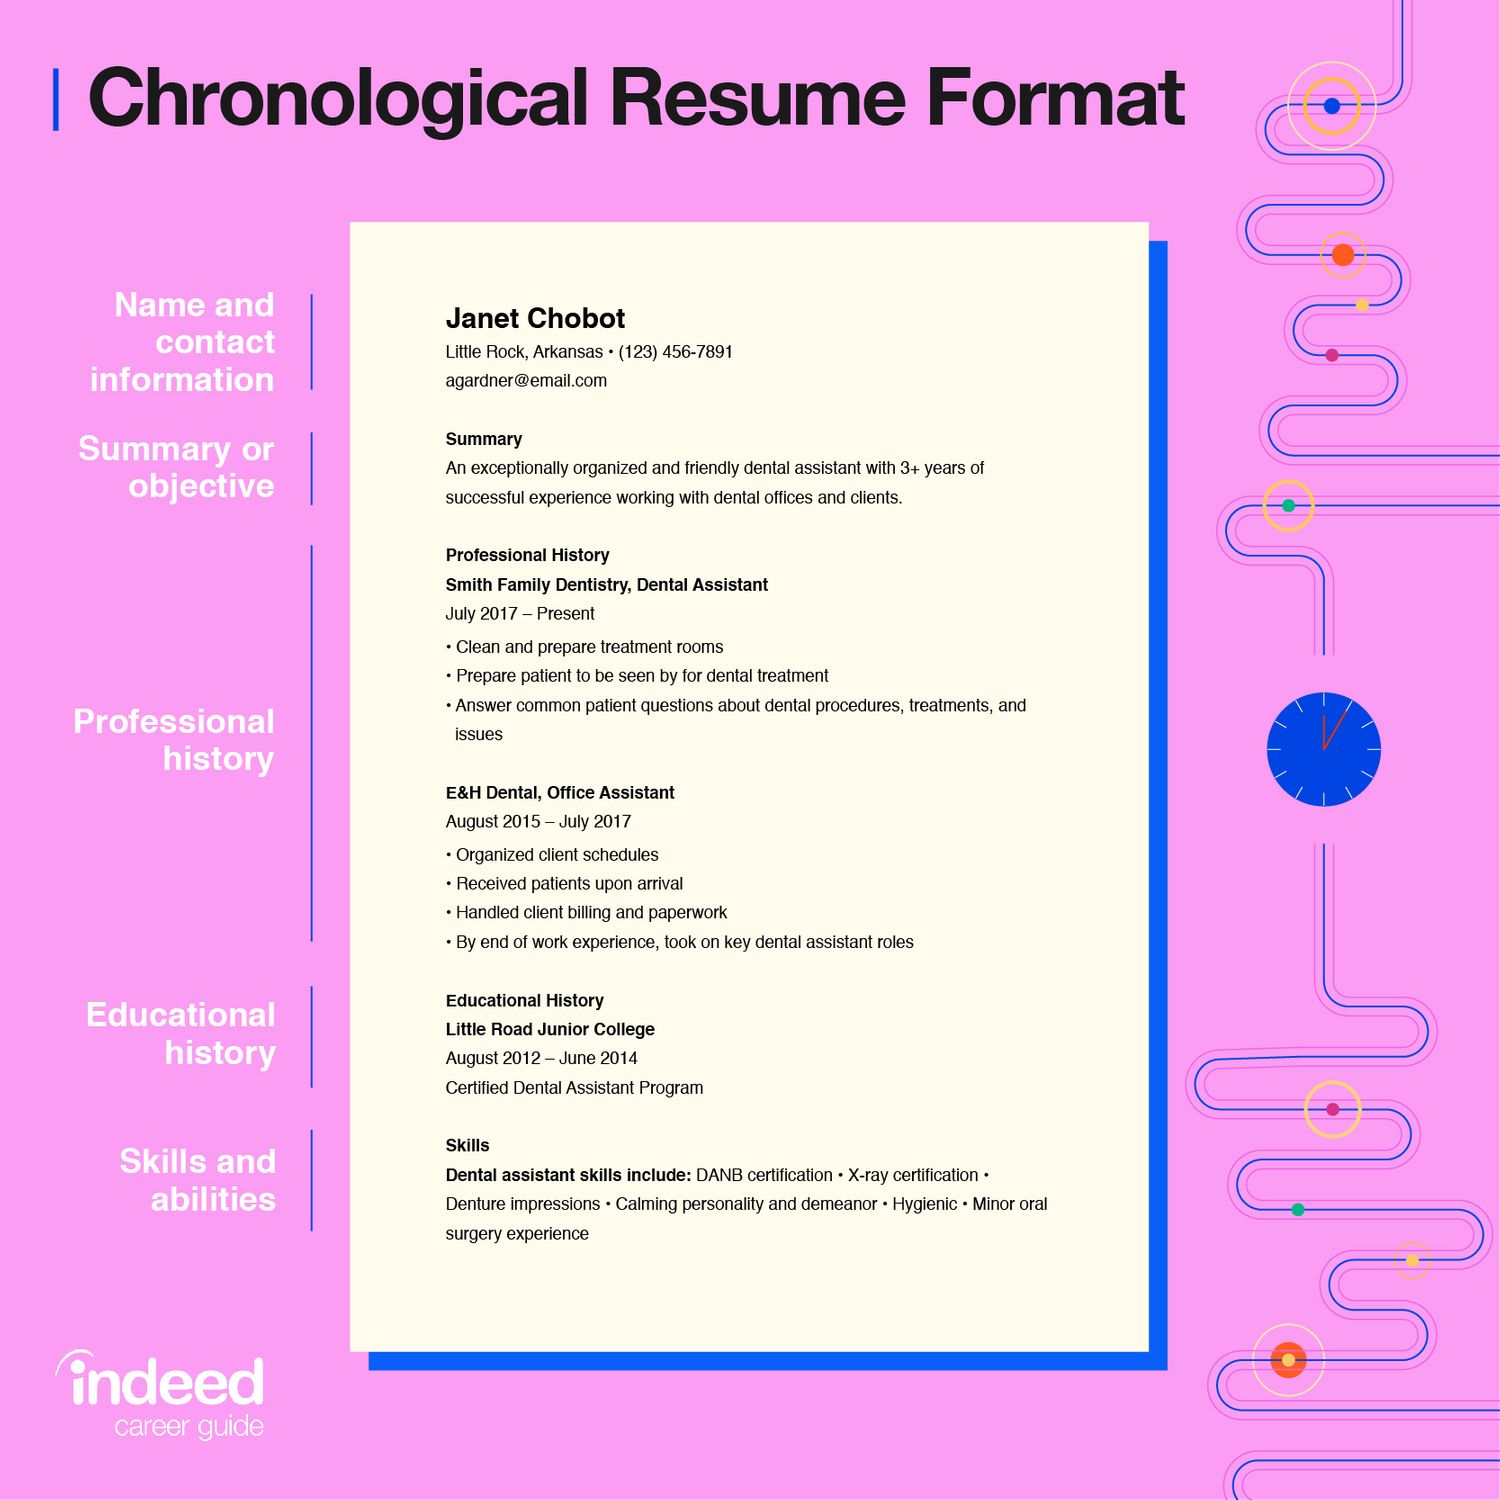 resume examples on indeed